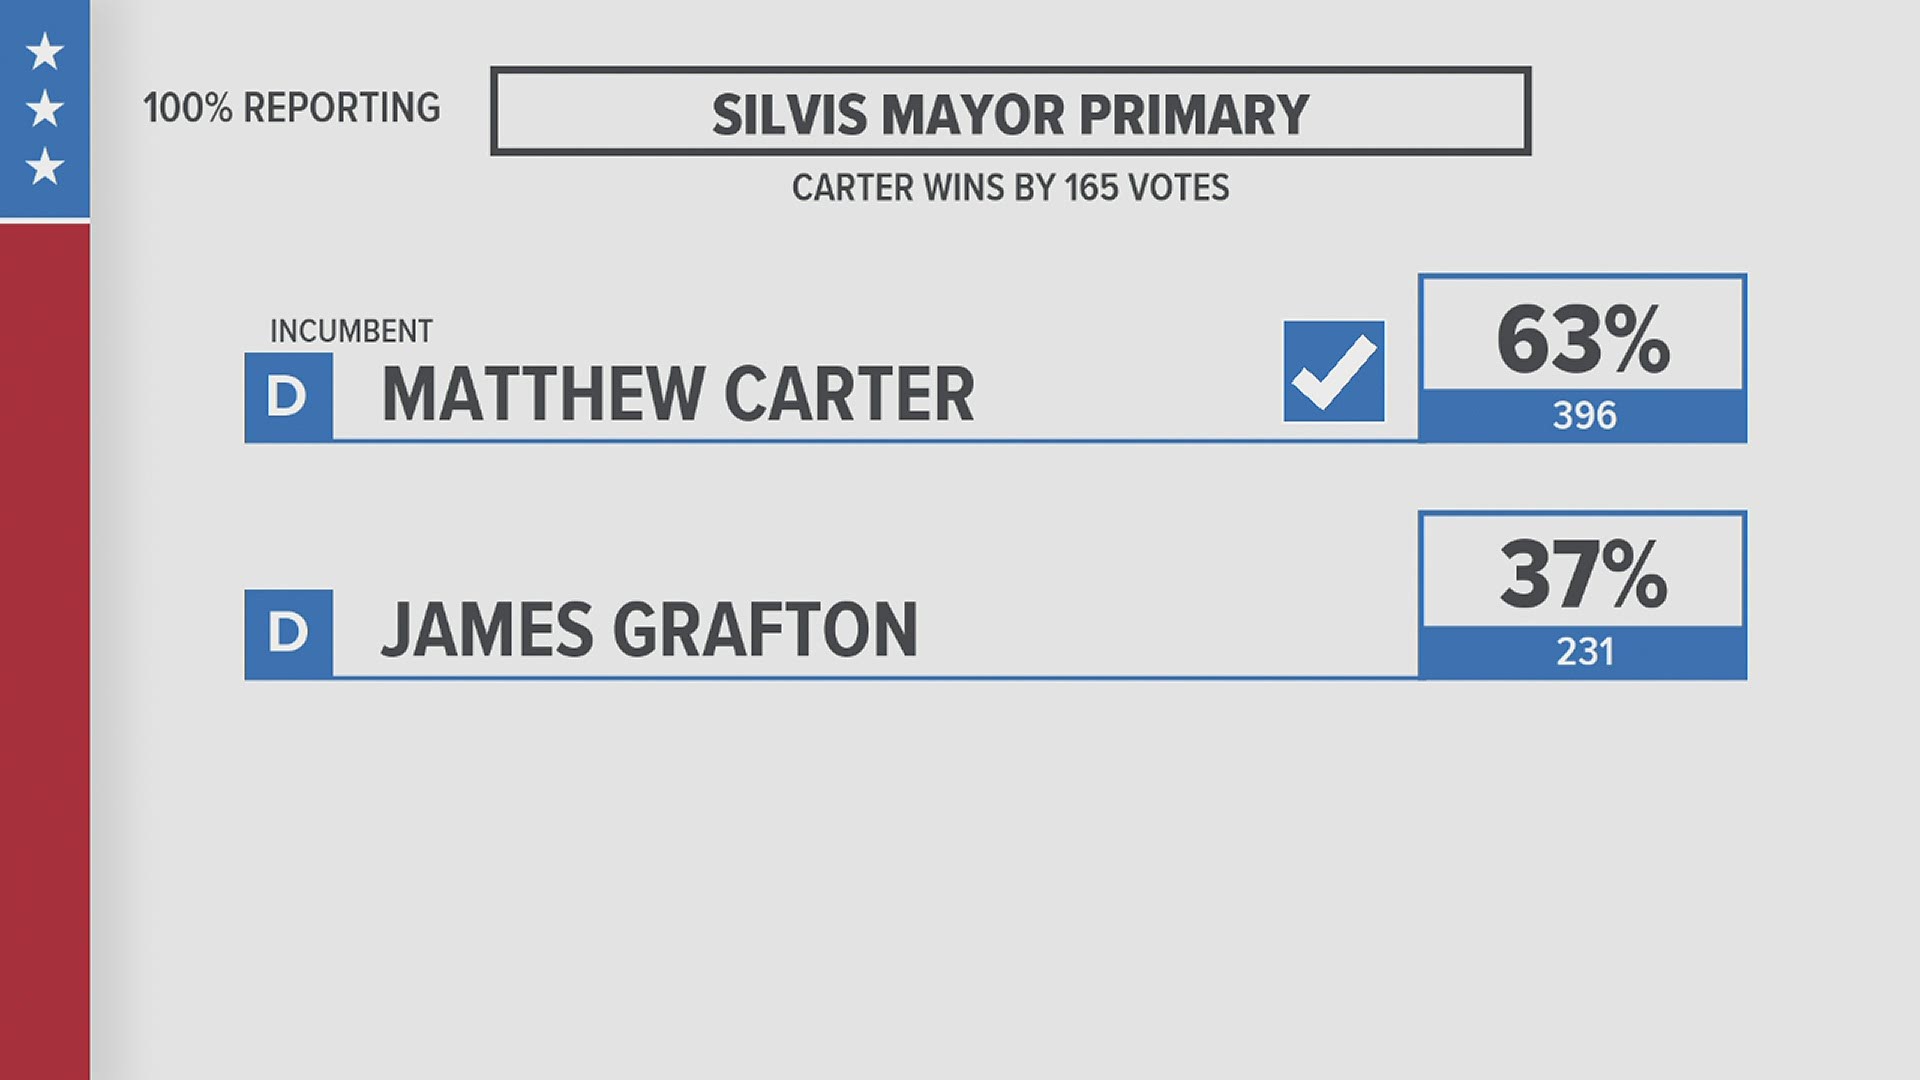 The incumbent Mayor Carter won the primary race over challenger James Grafton with almost two-thirds of the total votes.